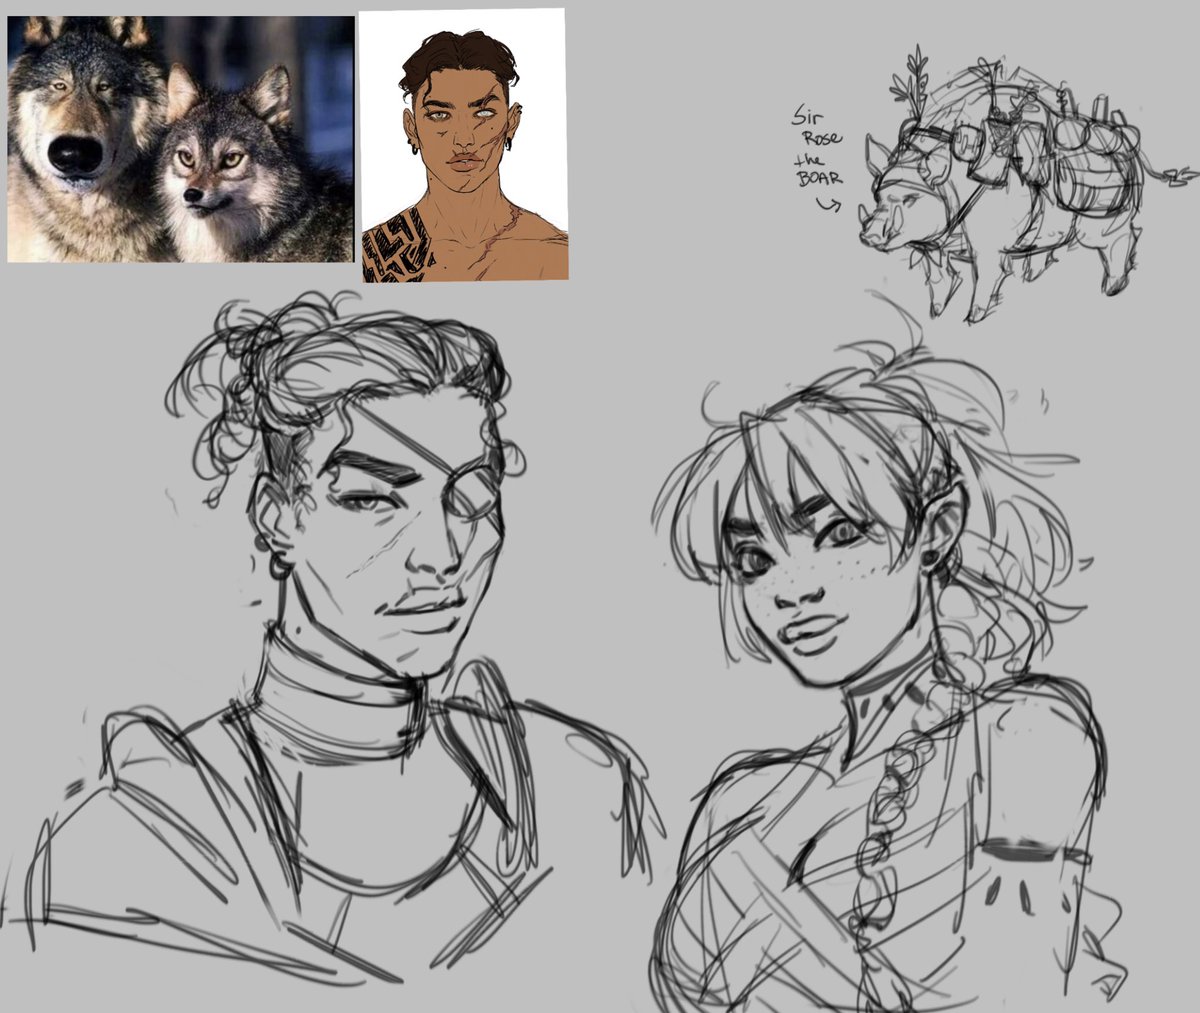 Did a rough sketch of mine (right) and joana's (left) elder scrolls characters 